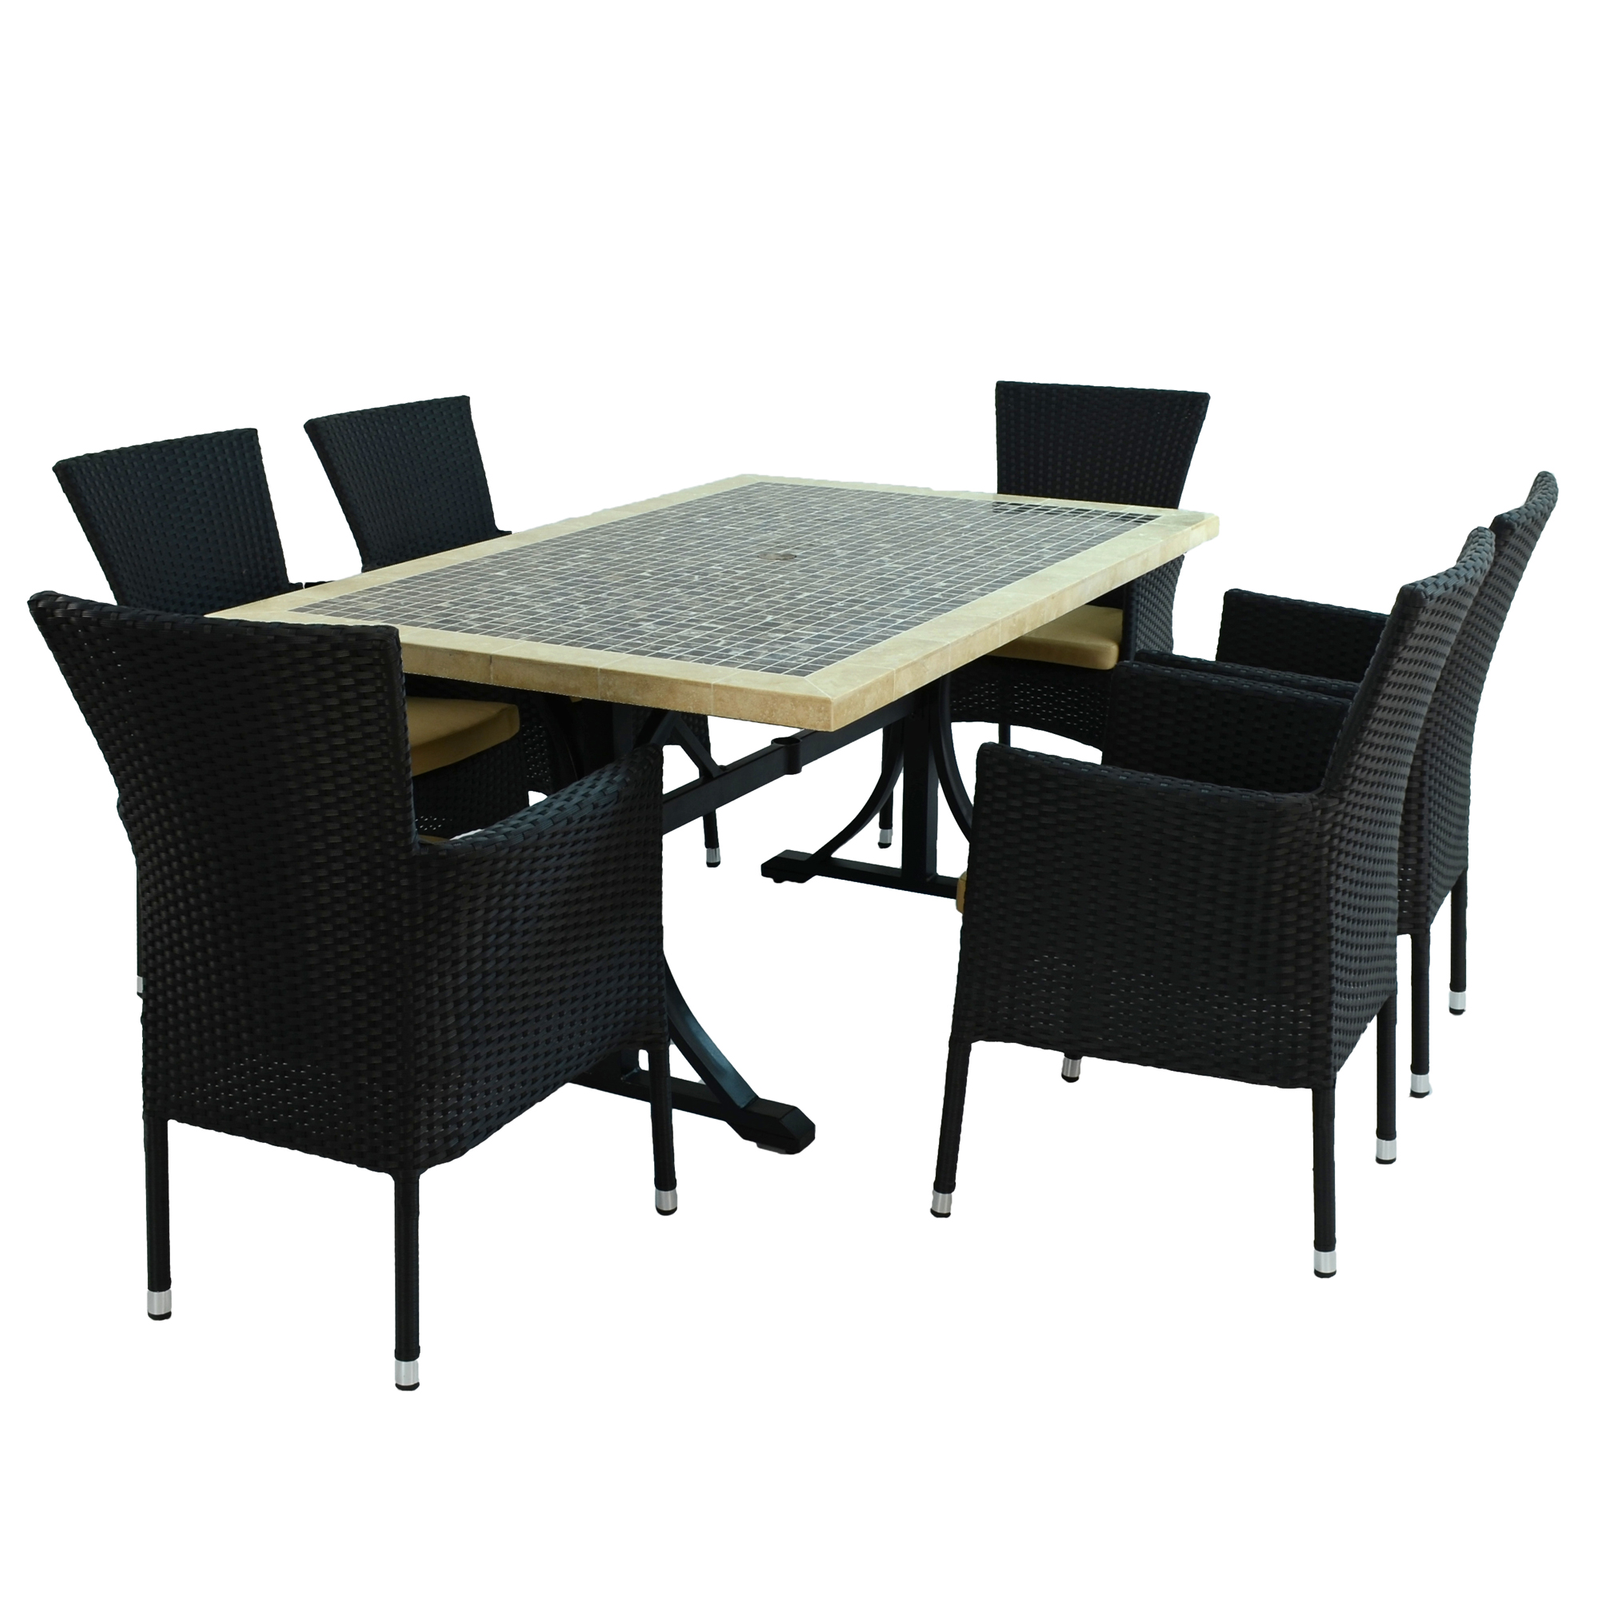 Byron Manor Wilmington Mosaic Stone Garden Dining Table With 6 Stockholm Black Wicker Chairs Dining Sets Byron Manor Default Title  